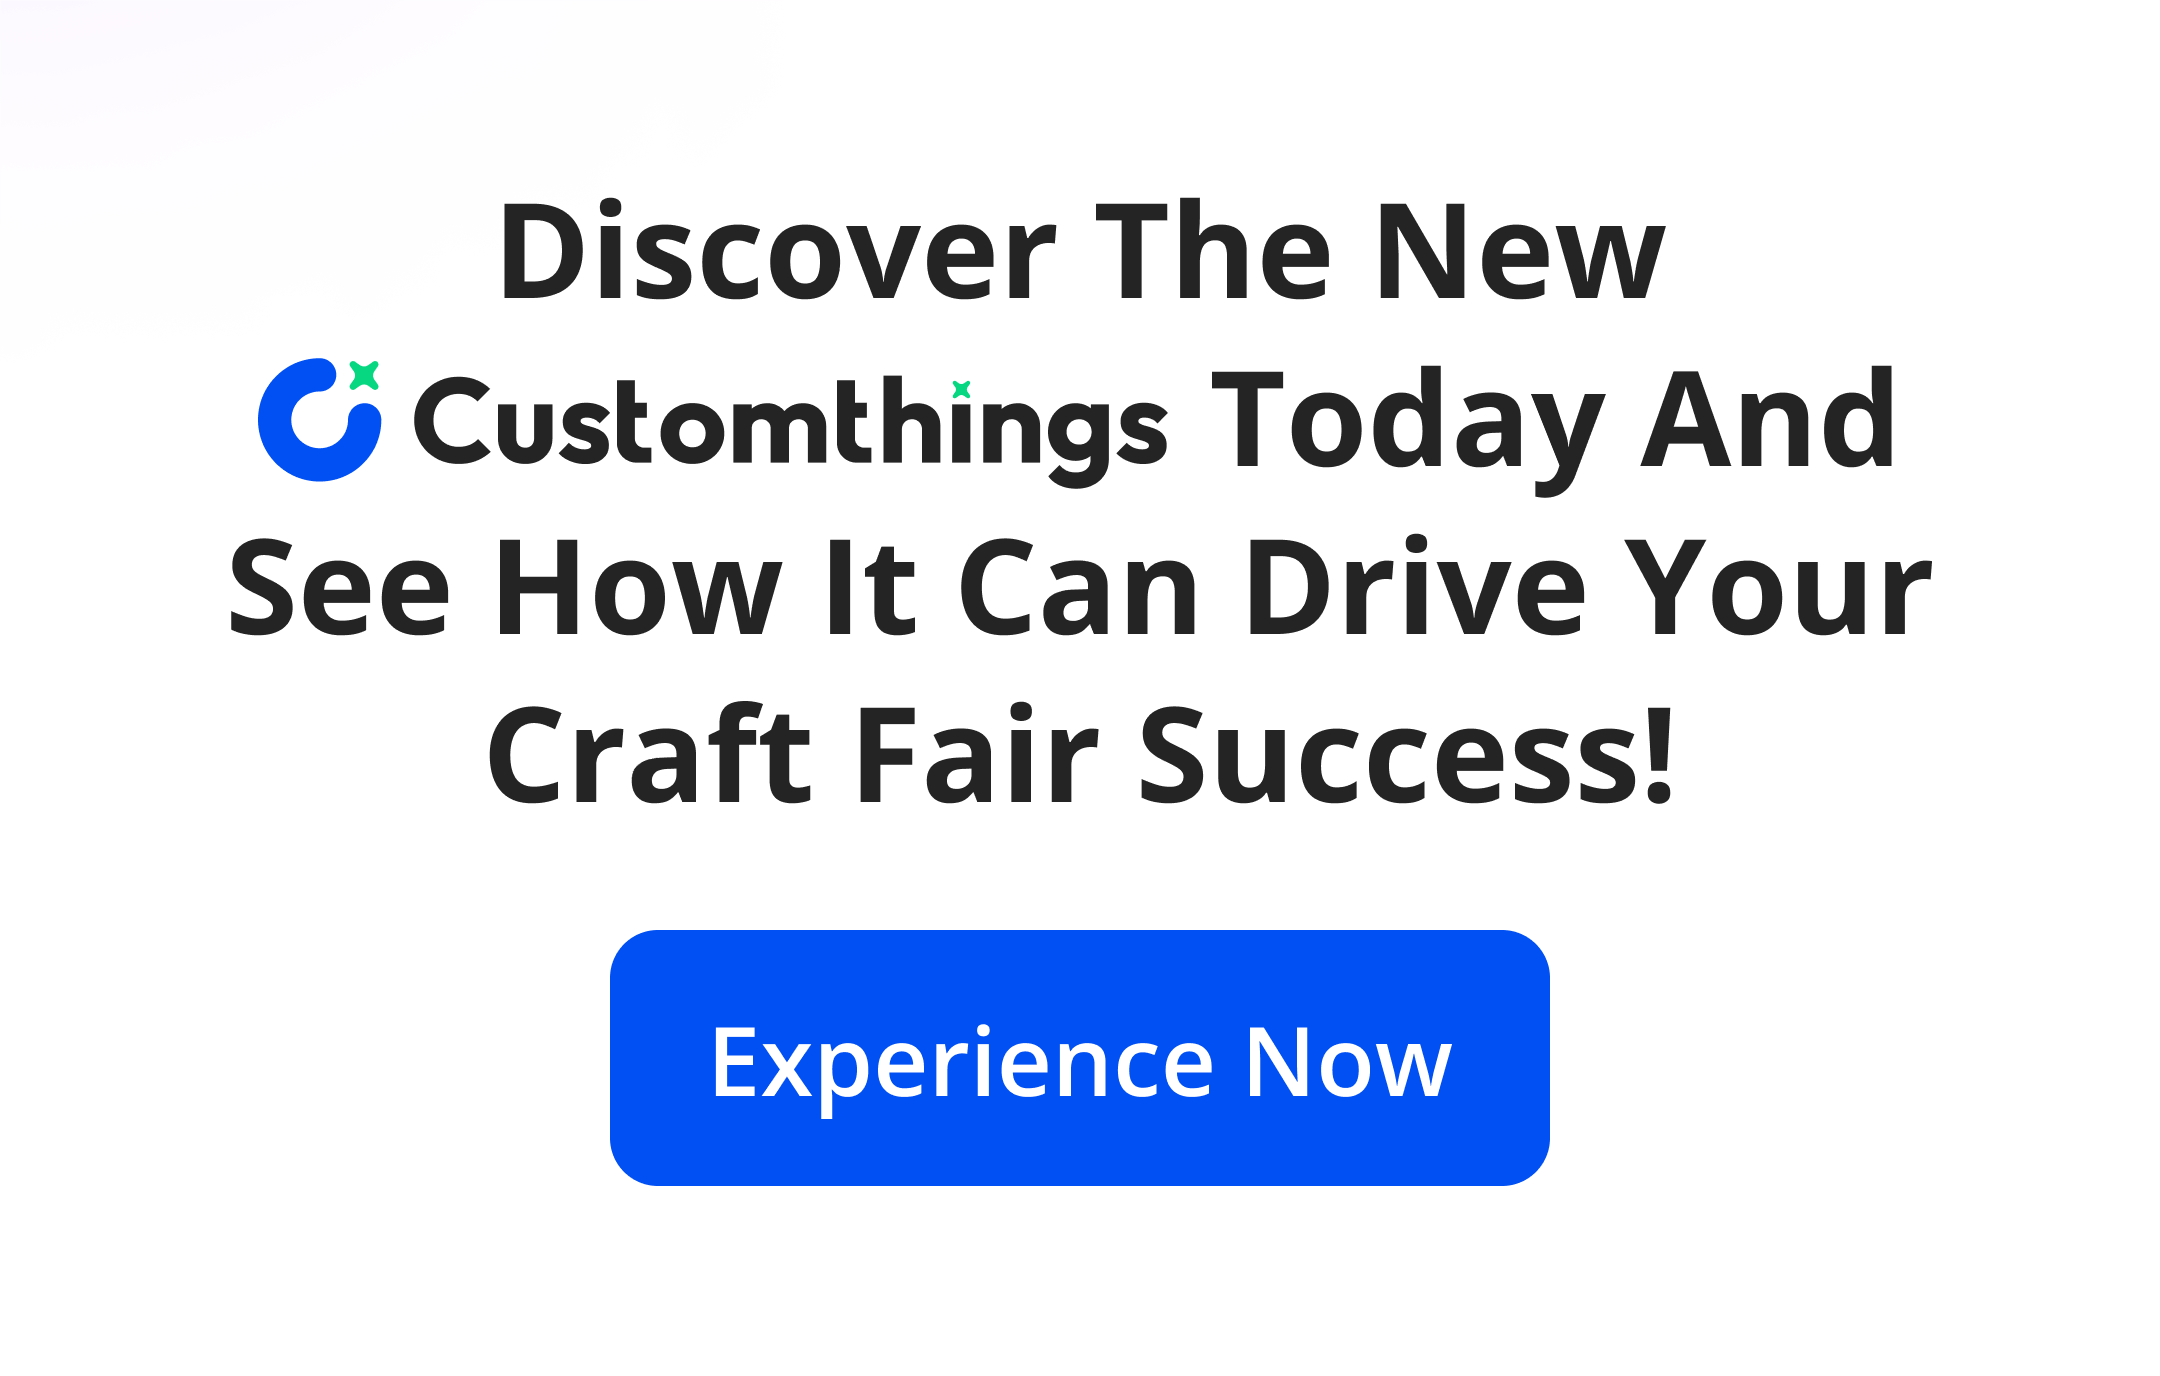 Discover the new Customthings today